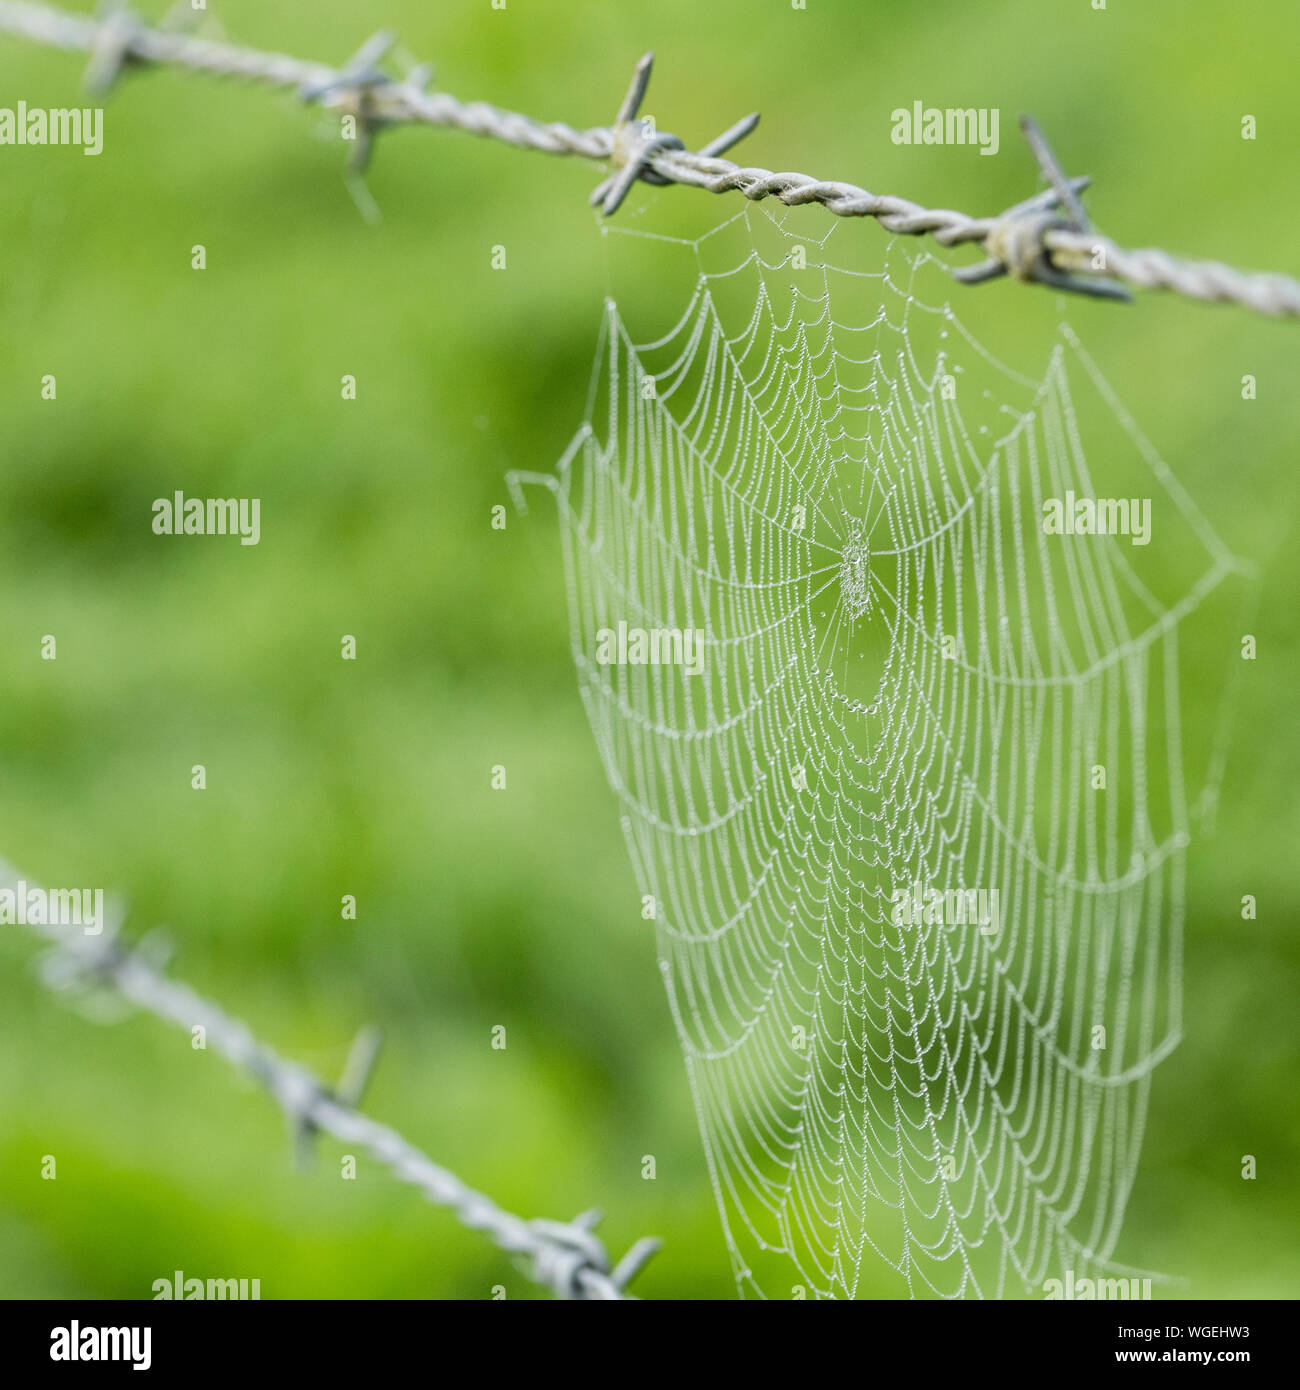 Isolated spider's web covered with remnants of morning dew, woven between two strands of barbed wire on a UK field fenceline. For caught in the web. Stock Photo